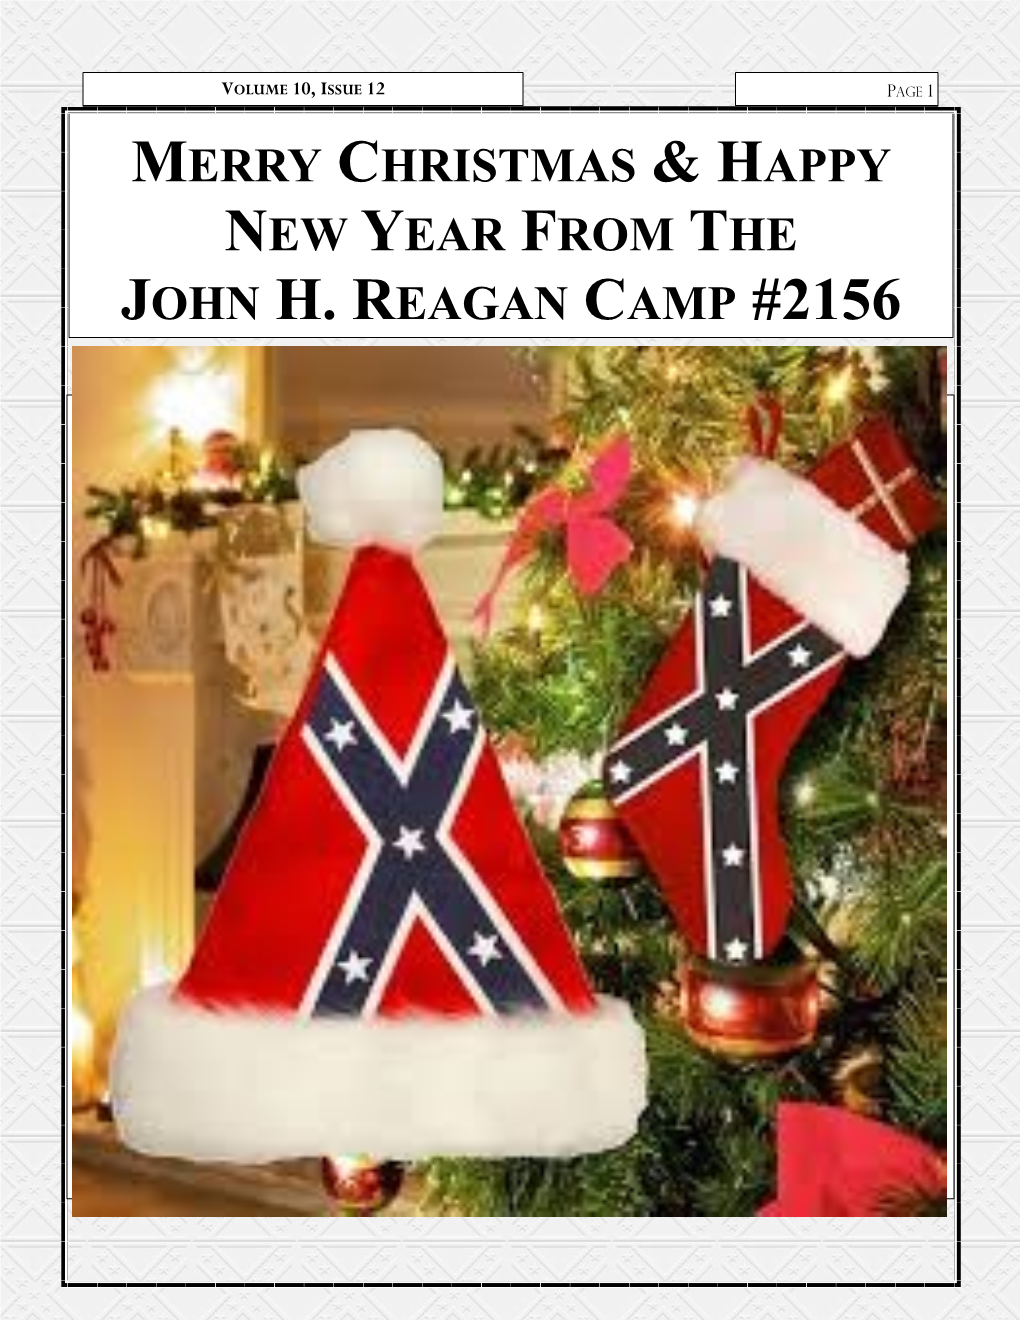 Merry Christmas & Happy New Year from the John H